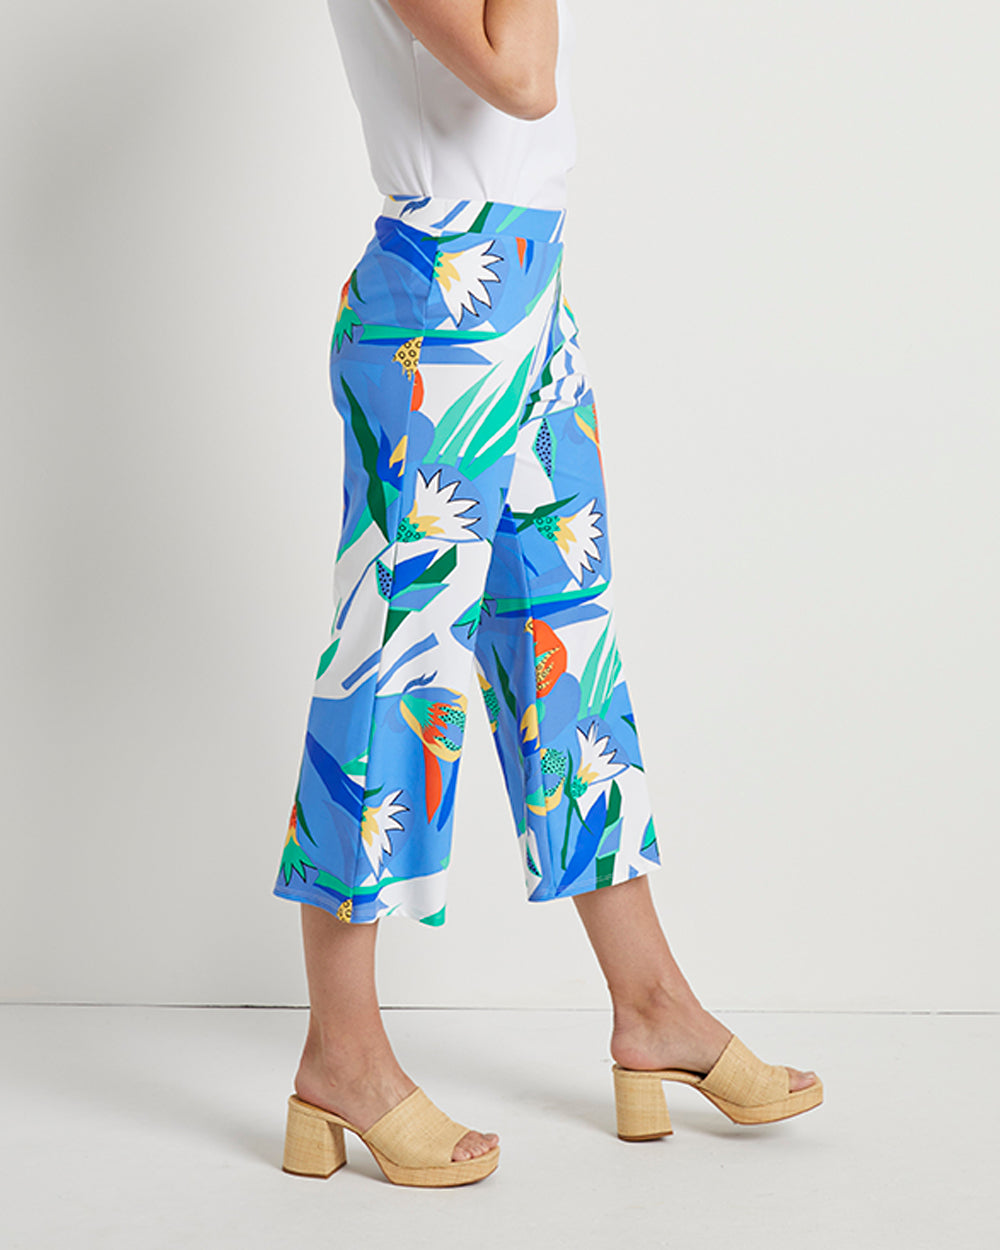 Trixie Cropped Pant - Jude Cloth